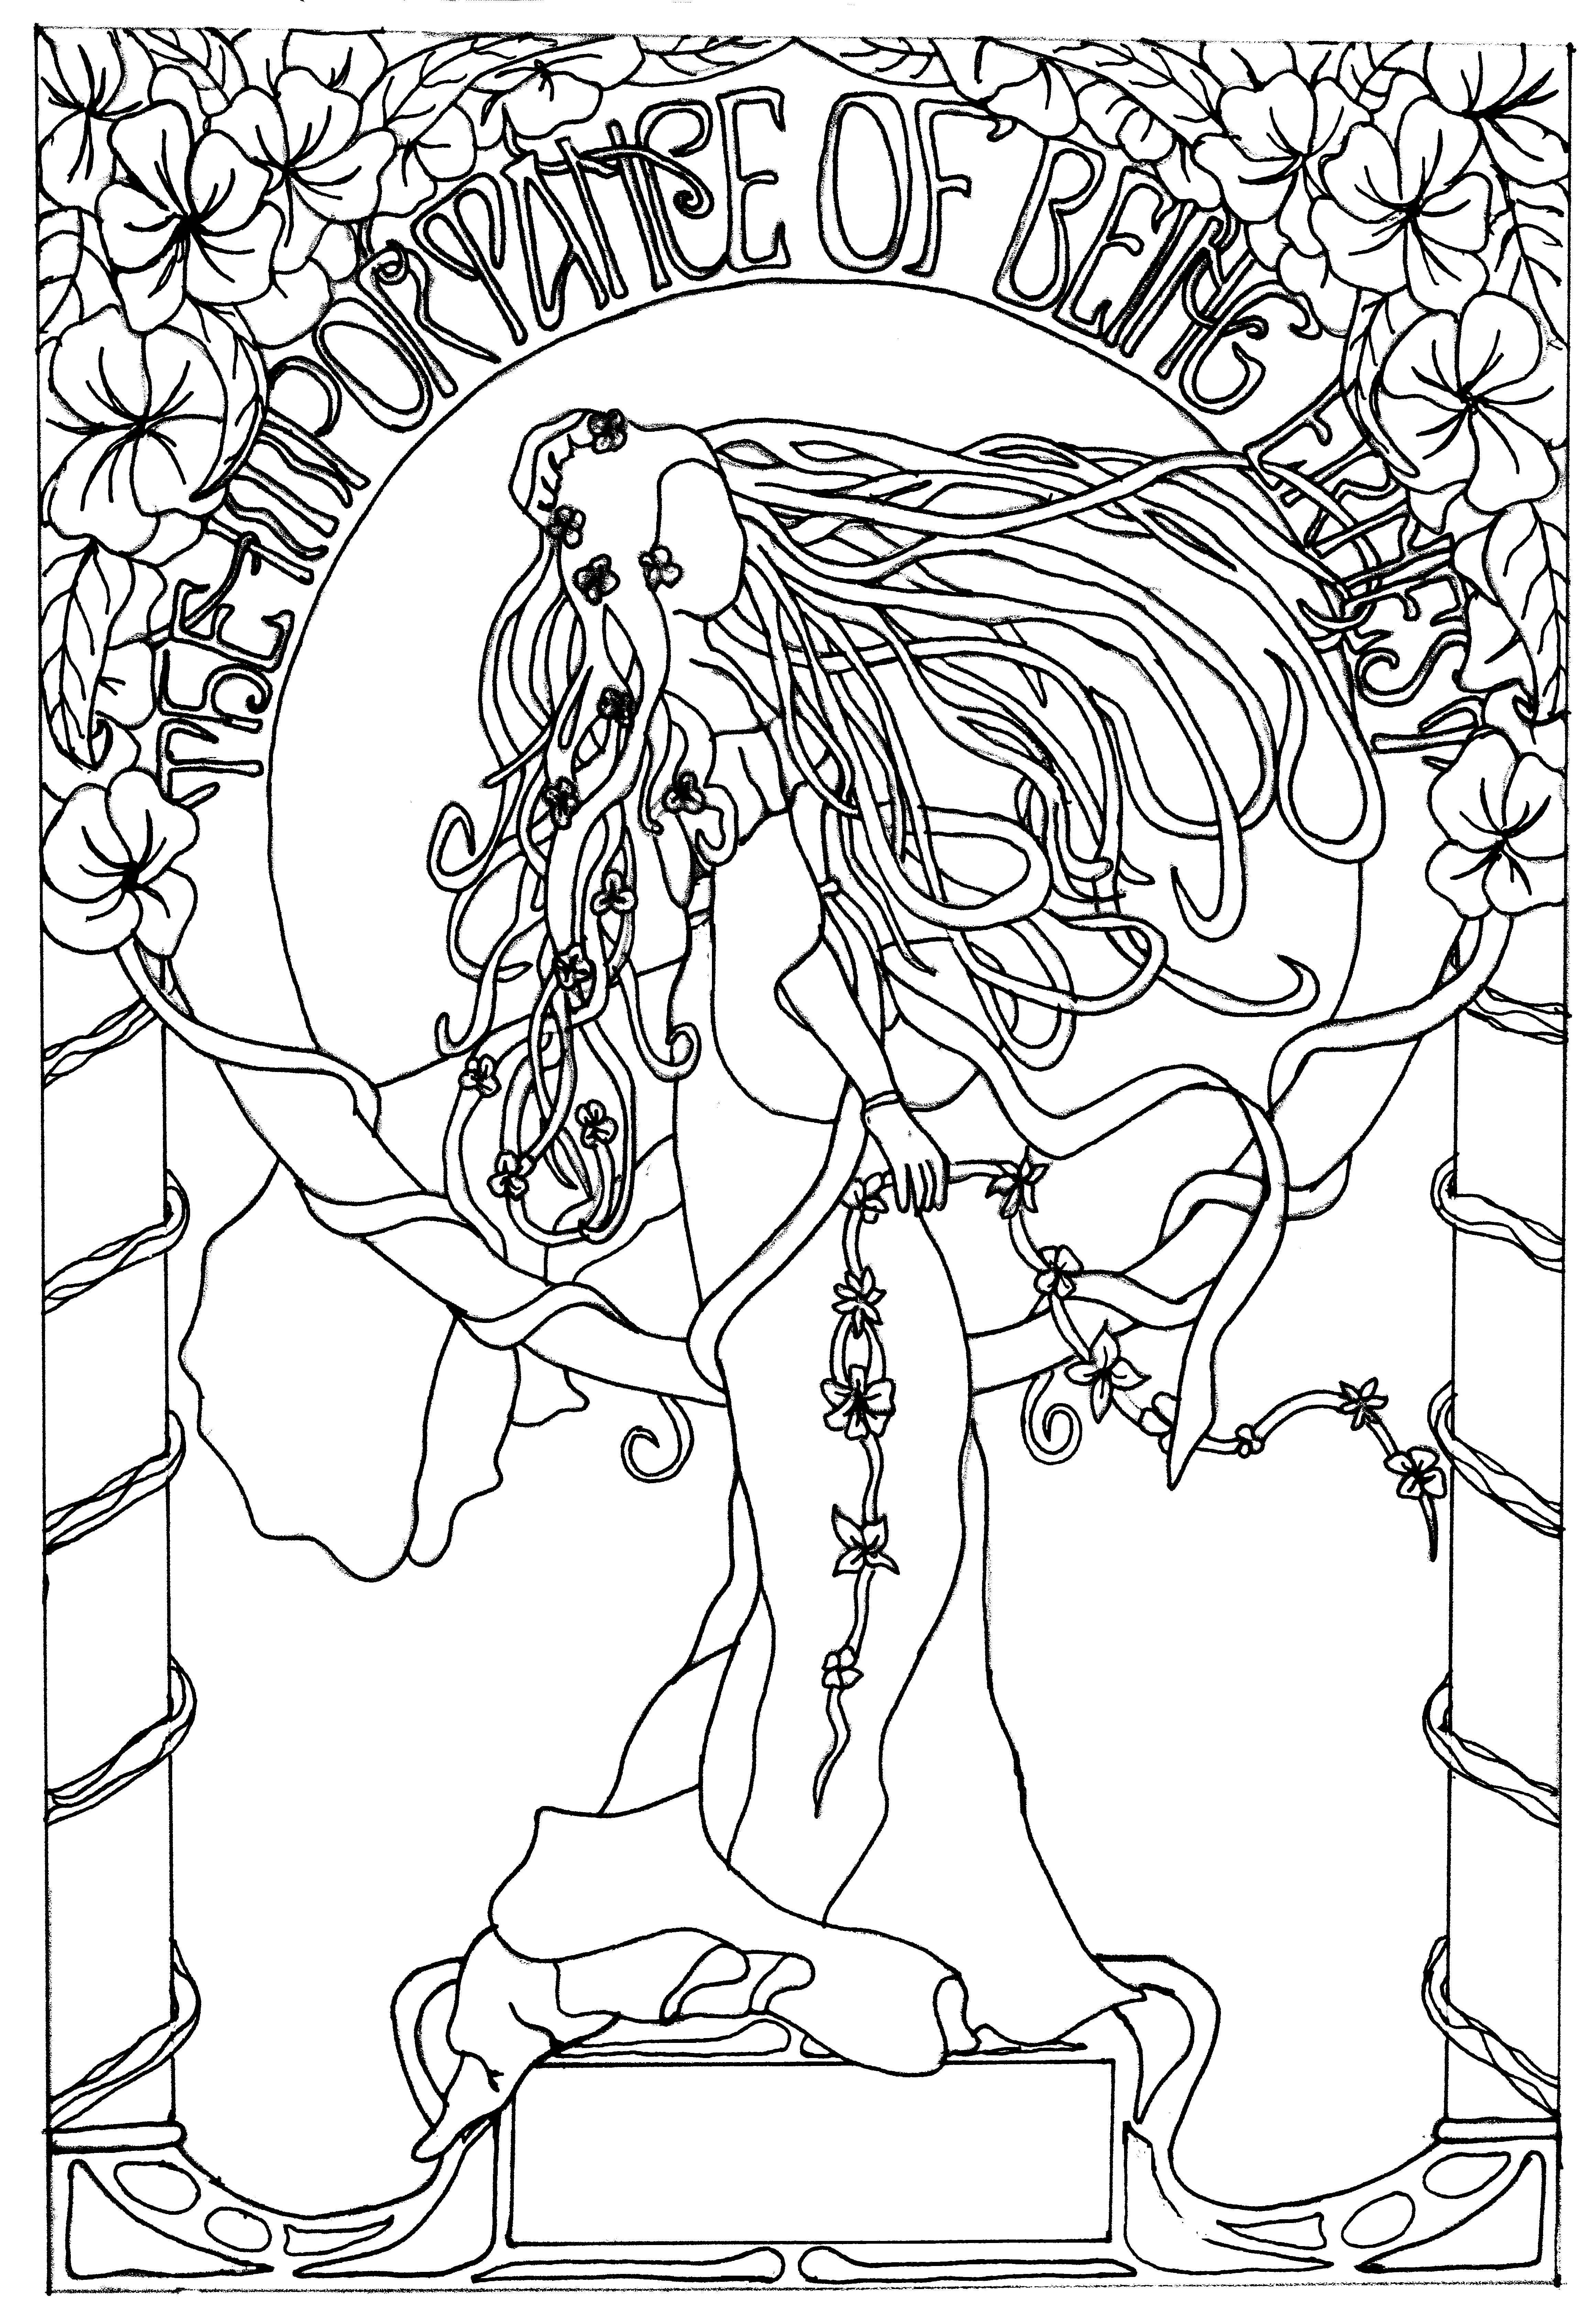 An Art Nouveau free coloring page, with a woman in the wind